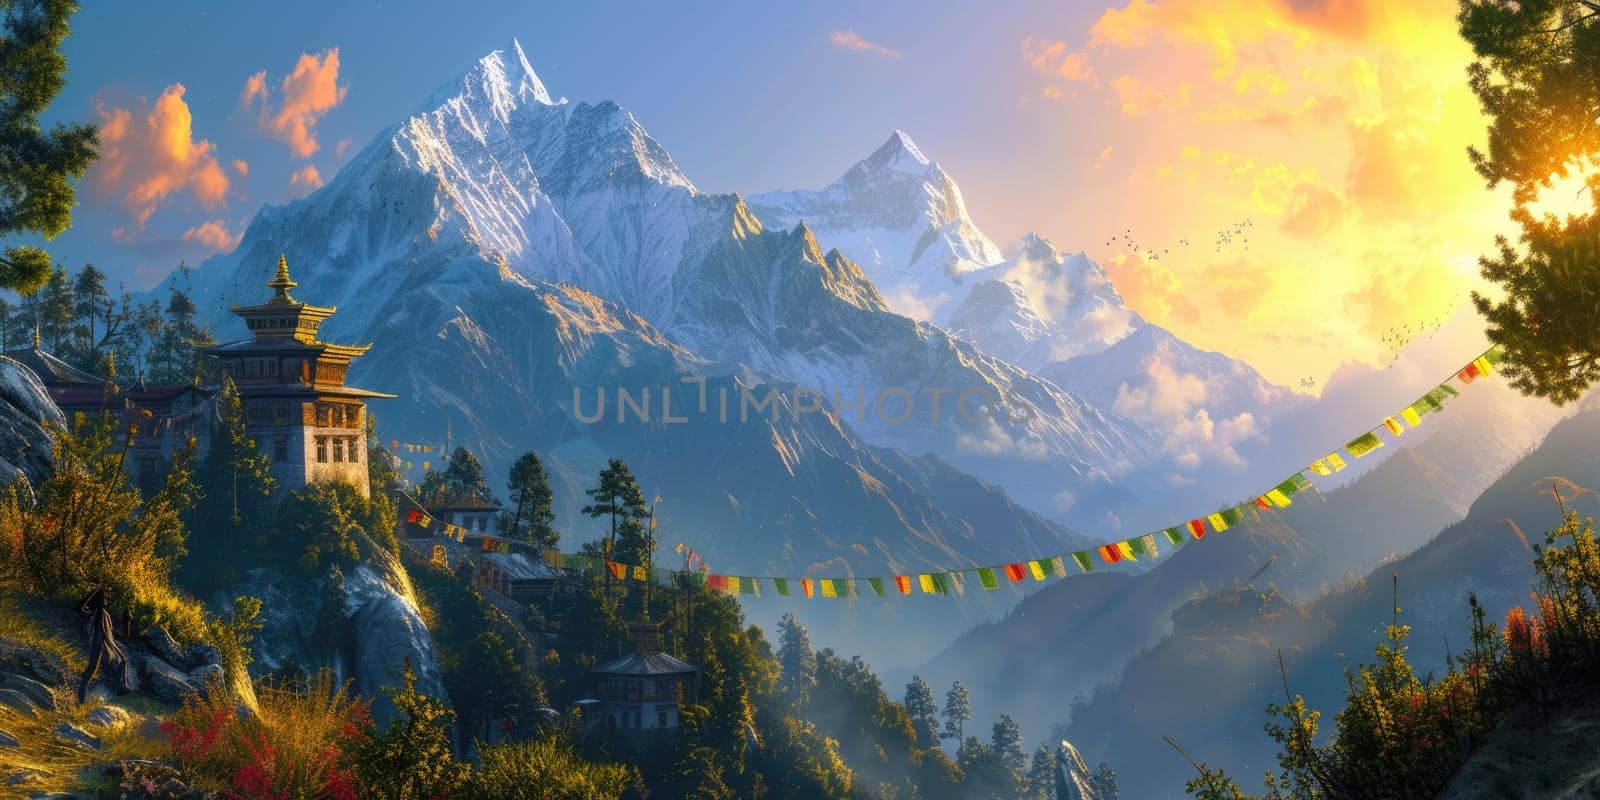 Mountain Temple with Prayer Flags at Sunrise. Resplendent. by biancoblue